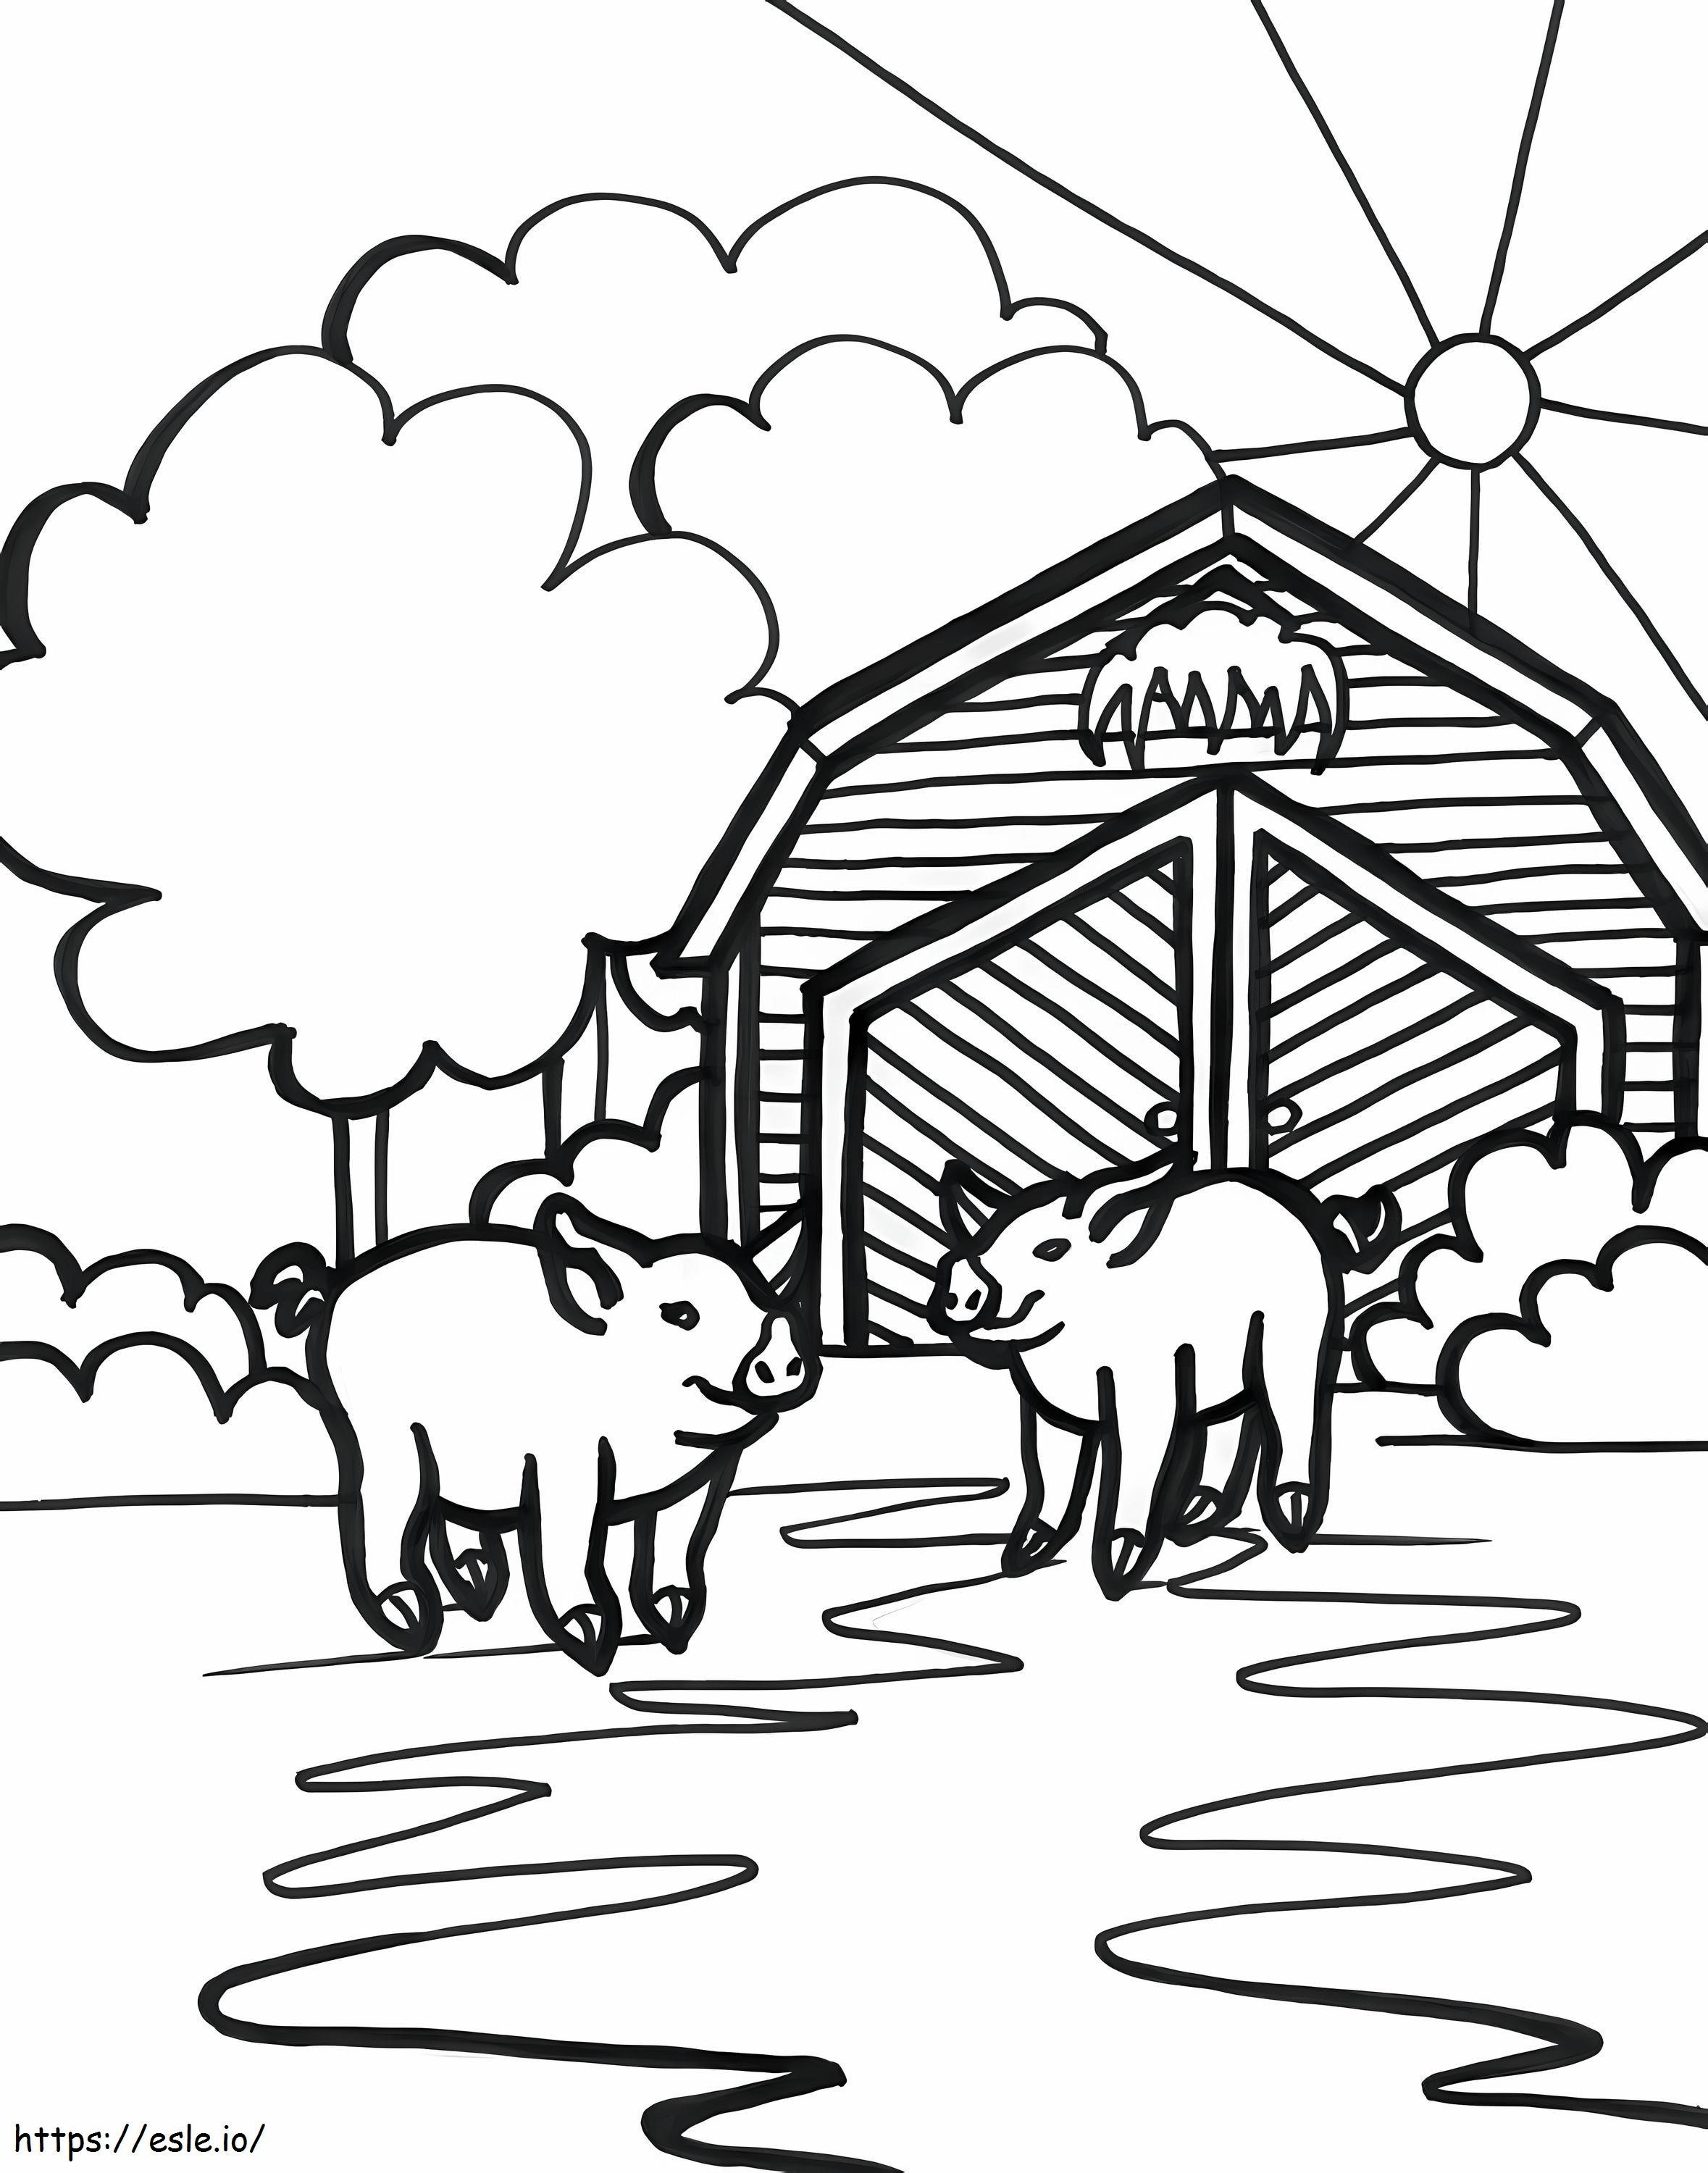 Two Pigs In Barn coloring page